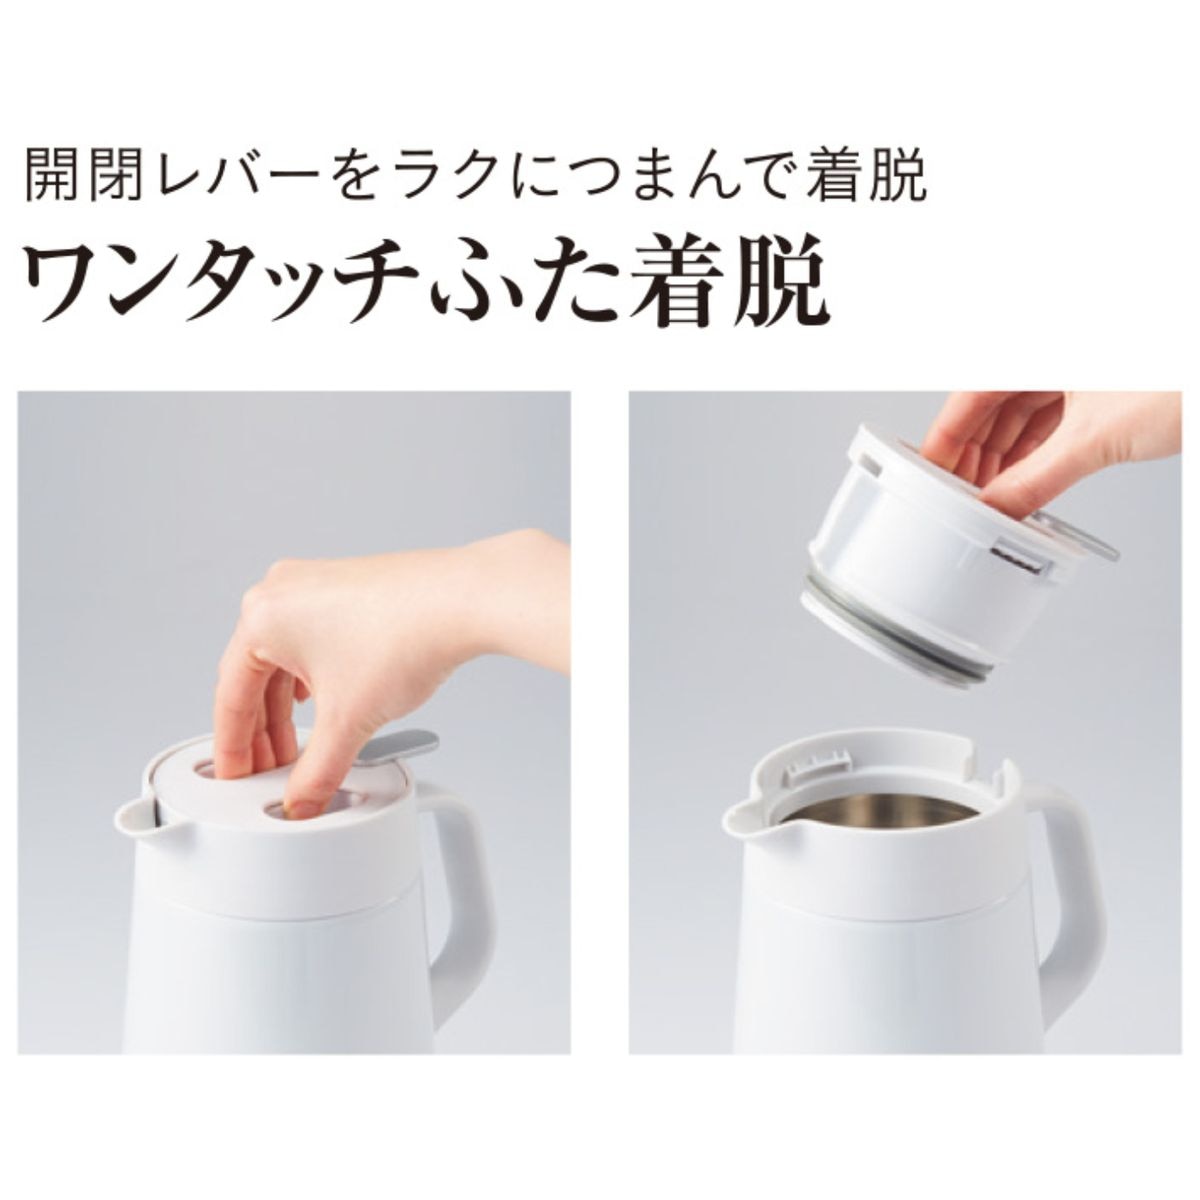 Japan's Tiger thermal insulation cold kettle household large